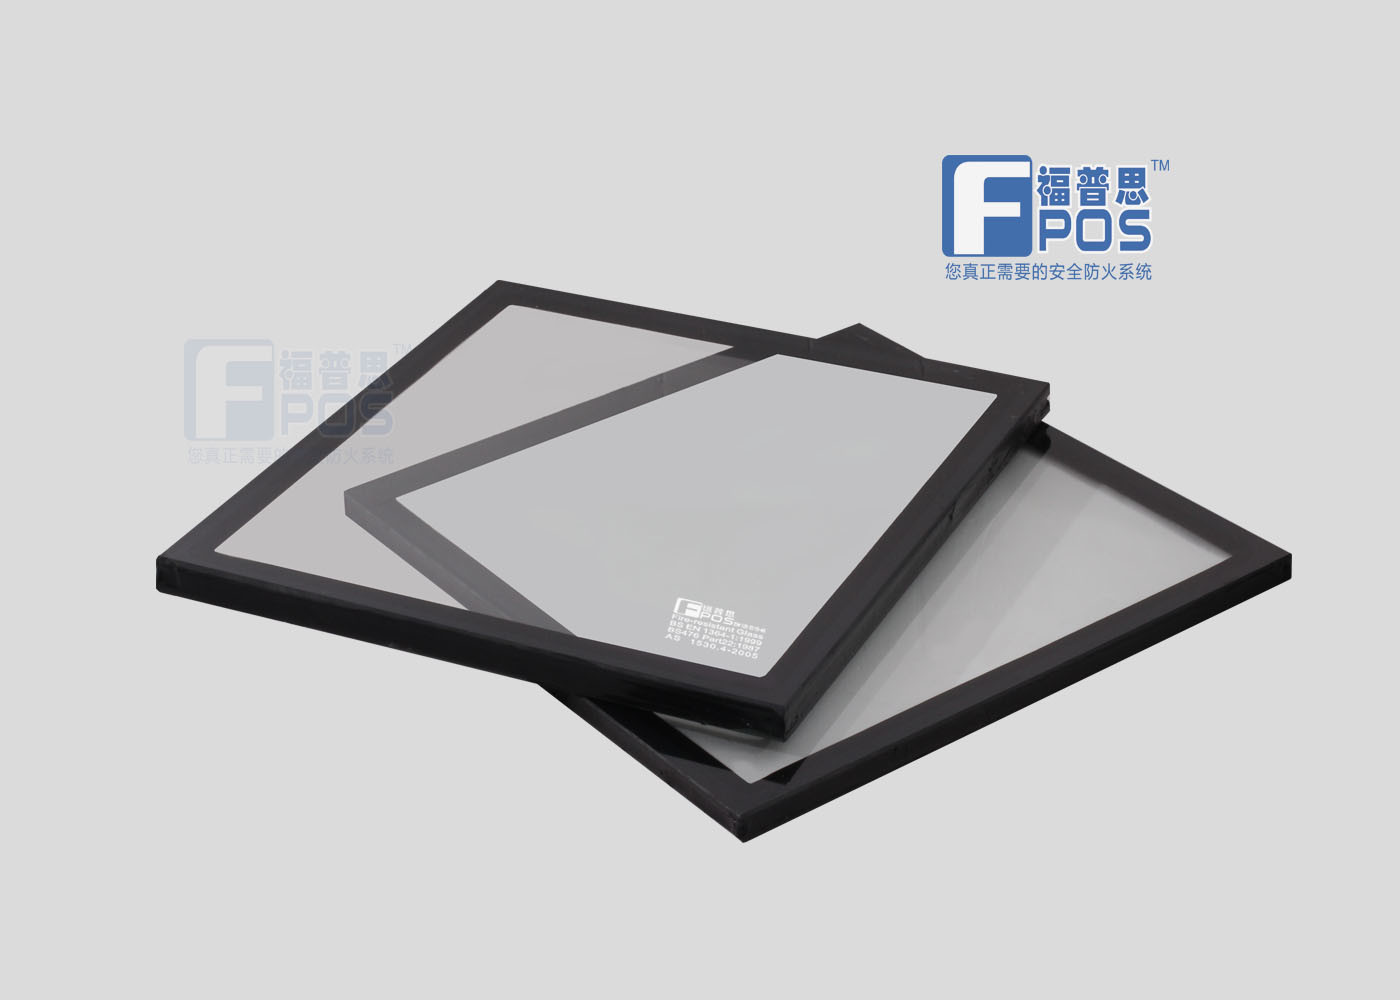 15mm Fpos Fire Resistant Glass and Security Glass for Office Wall